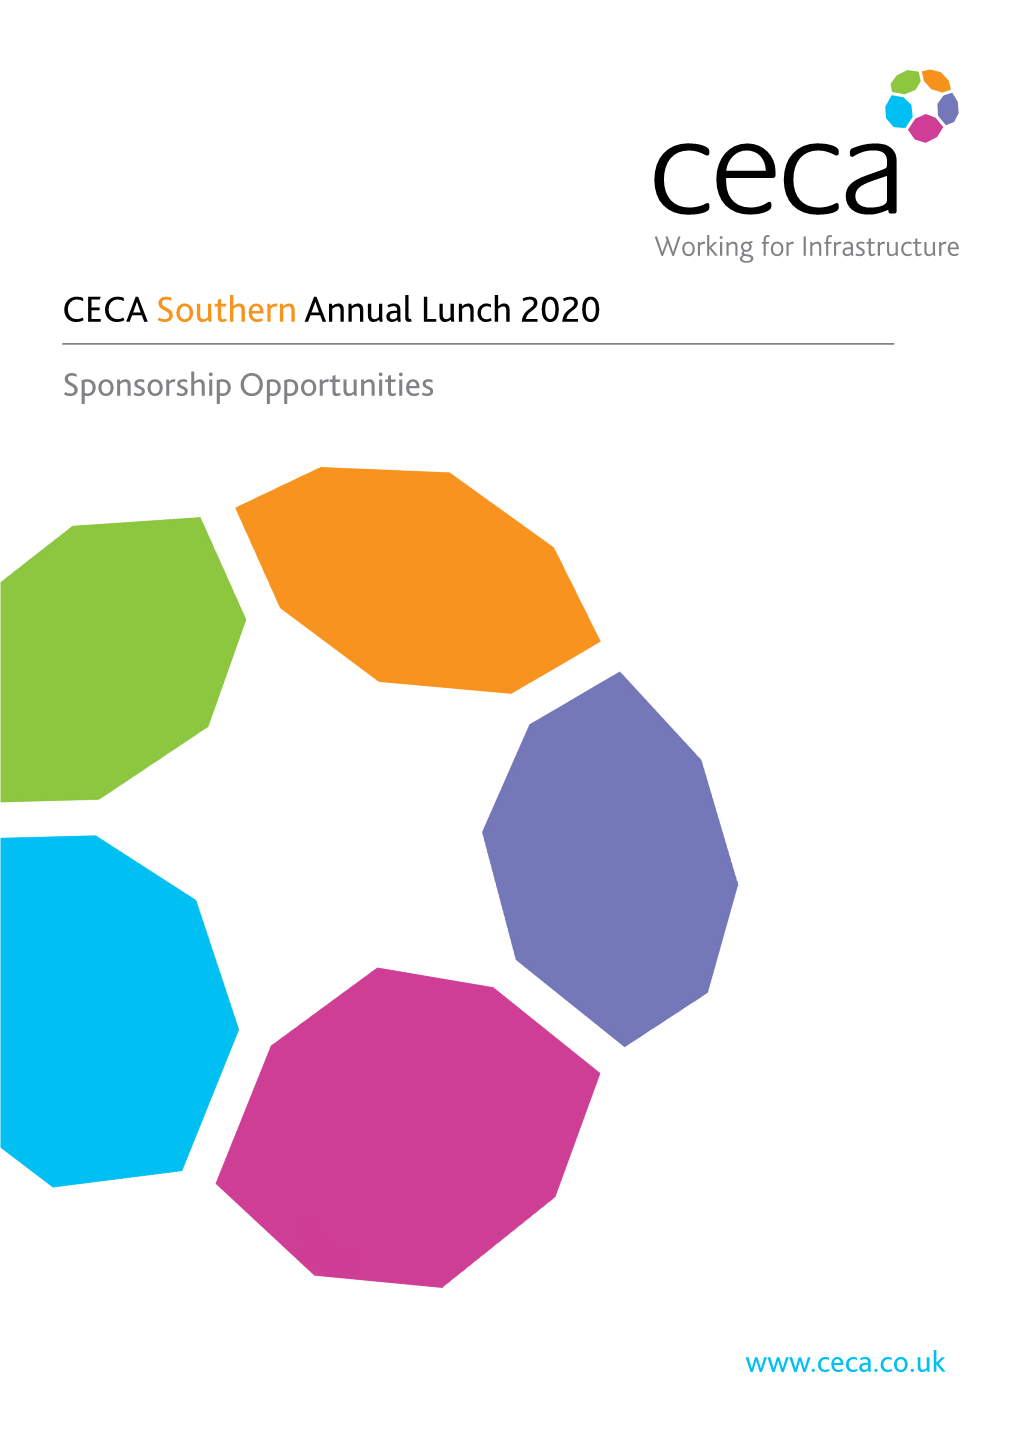 CECA Southernannual Lunch 2020